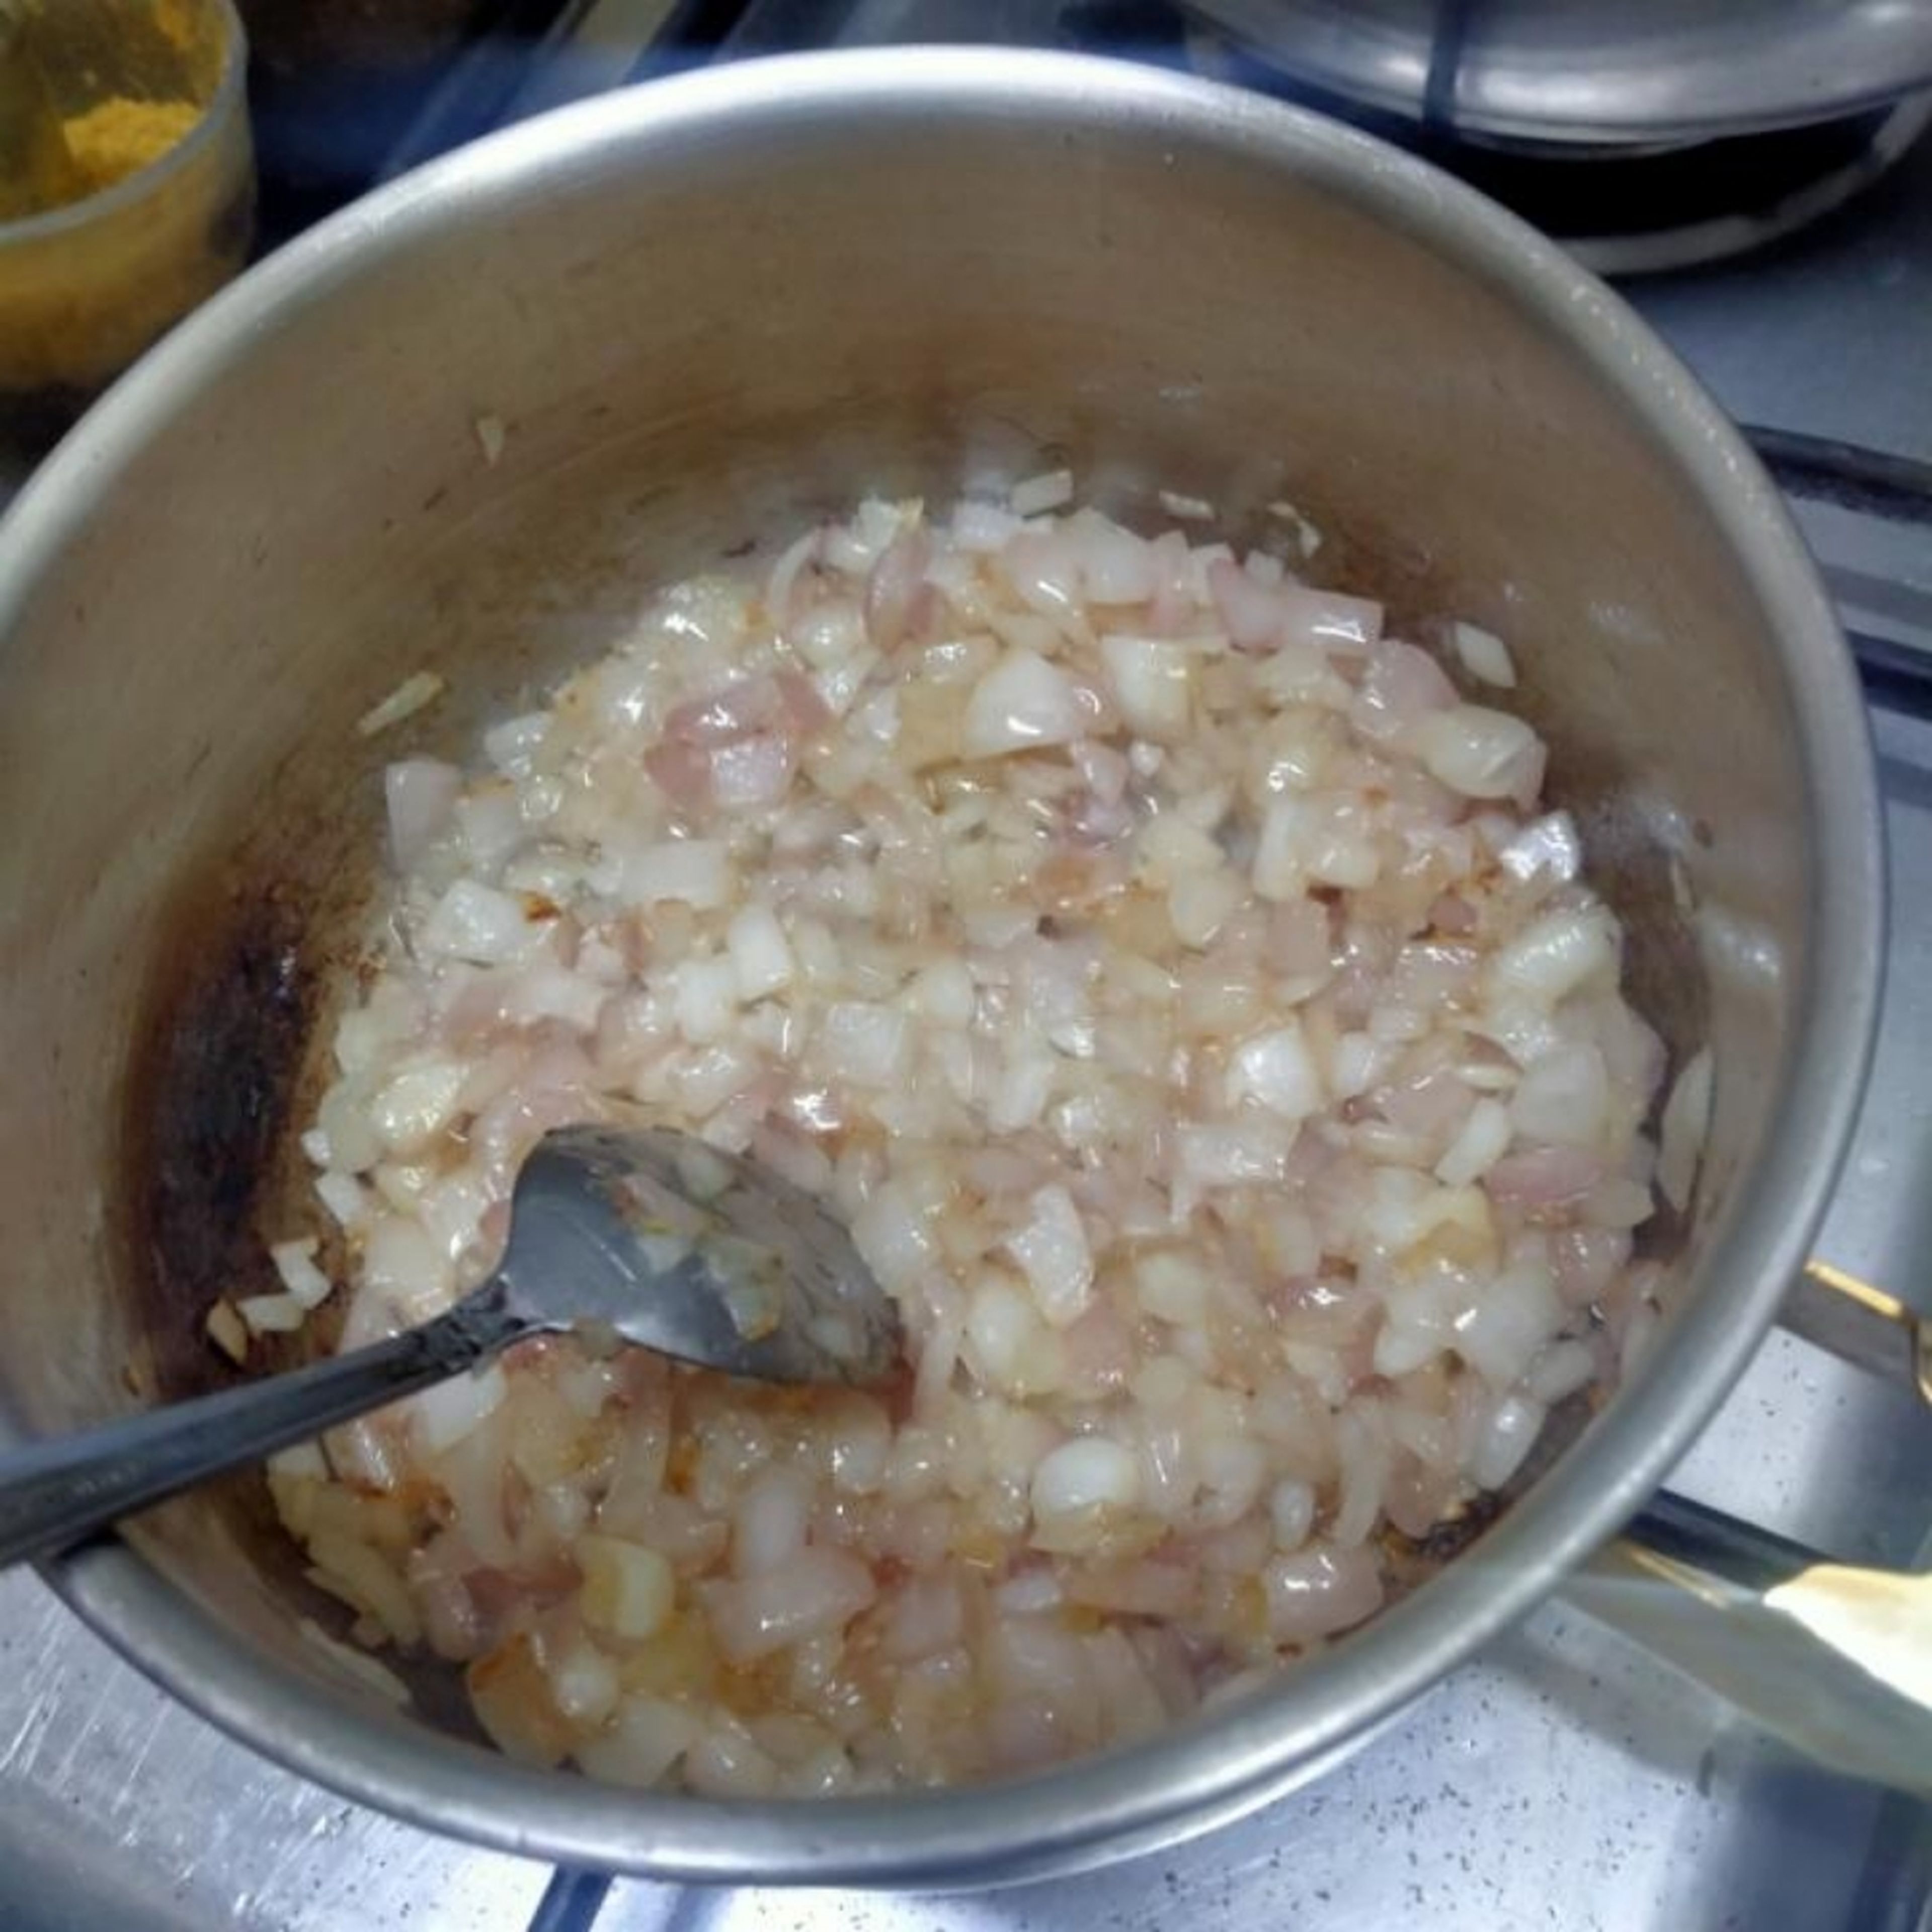 chop one large onion or 2 medium and stir with oil until it gets soft